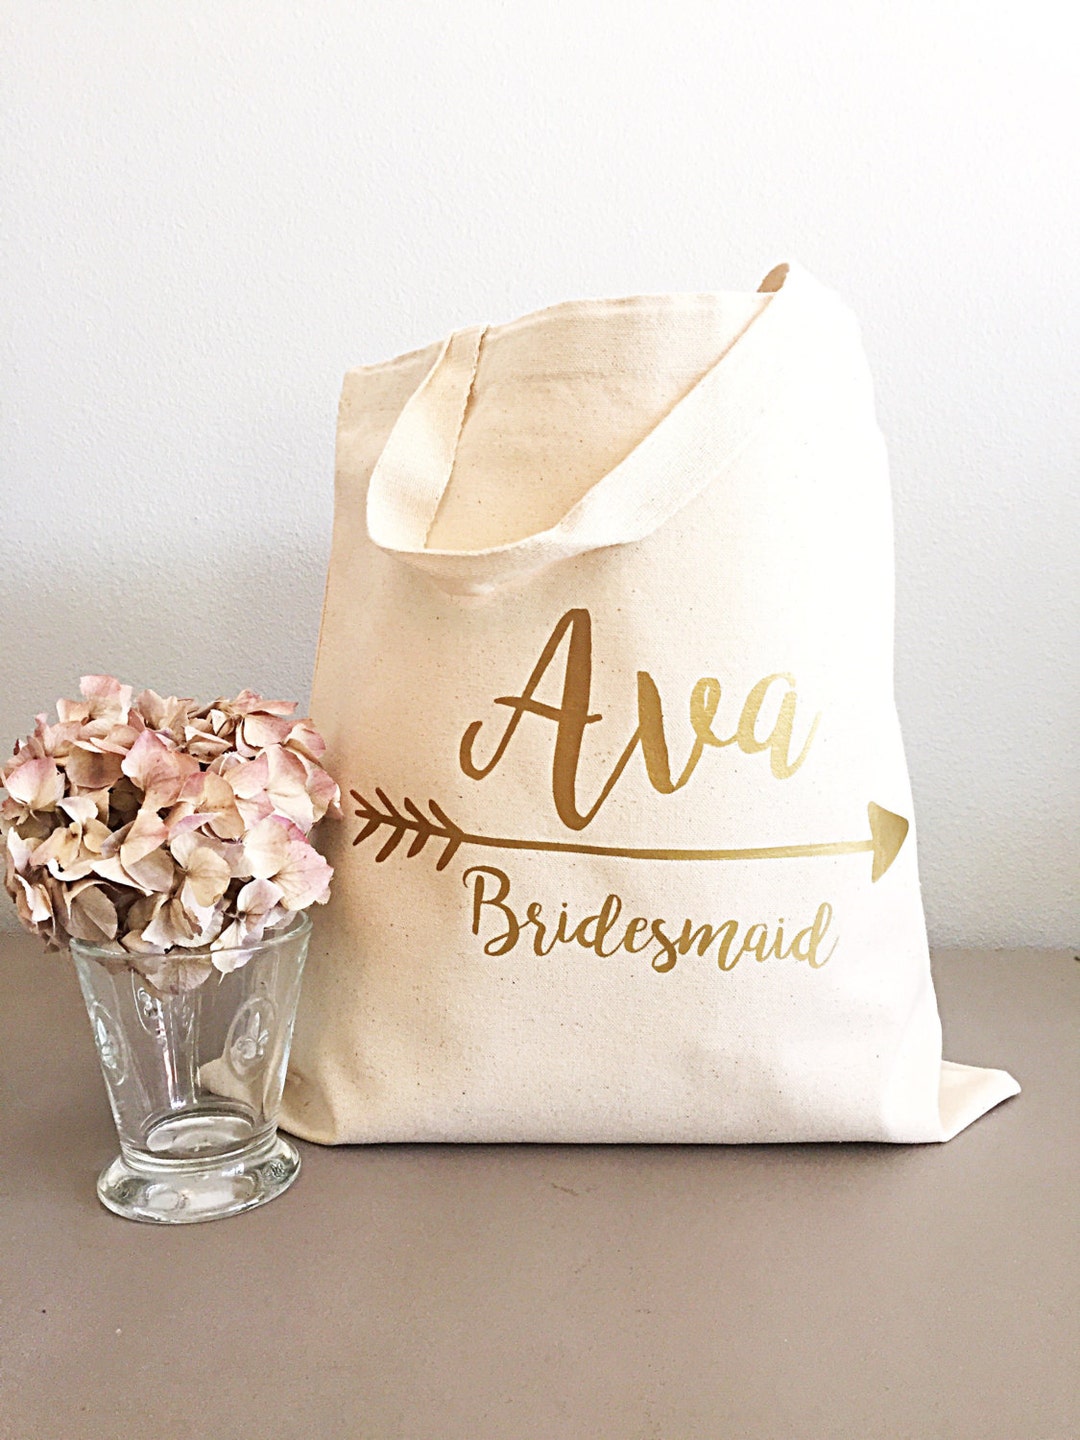 Personalized Tote Bags for Women Gold Personalized Tote - Etsy